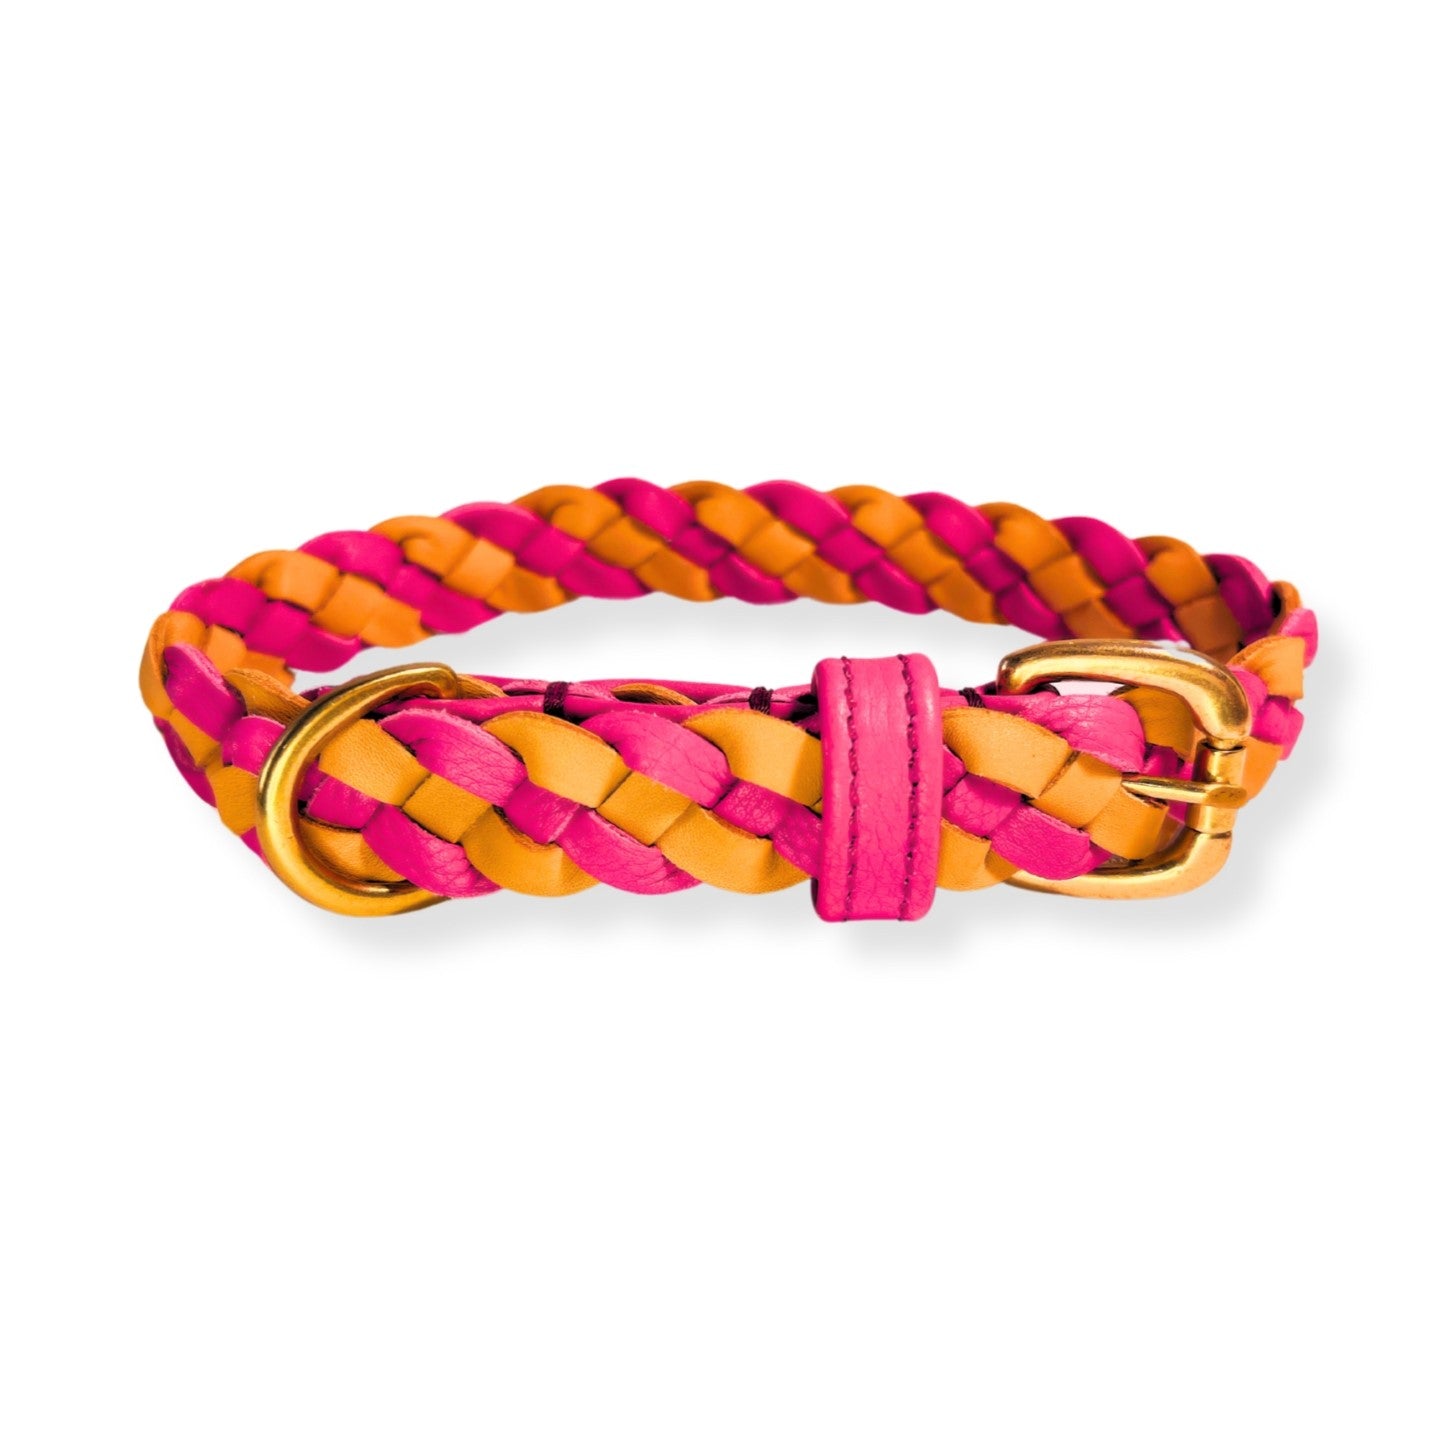 A vibrantly colored LuLu Collar in hot pink, featuring a gold-toned clasp and accents, set against a crisp white background, perfect as a puppy gift. Brand: Georgie Paws.